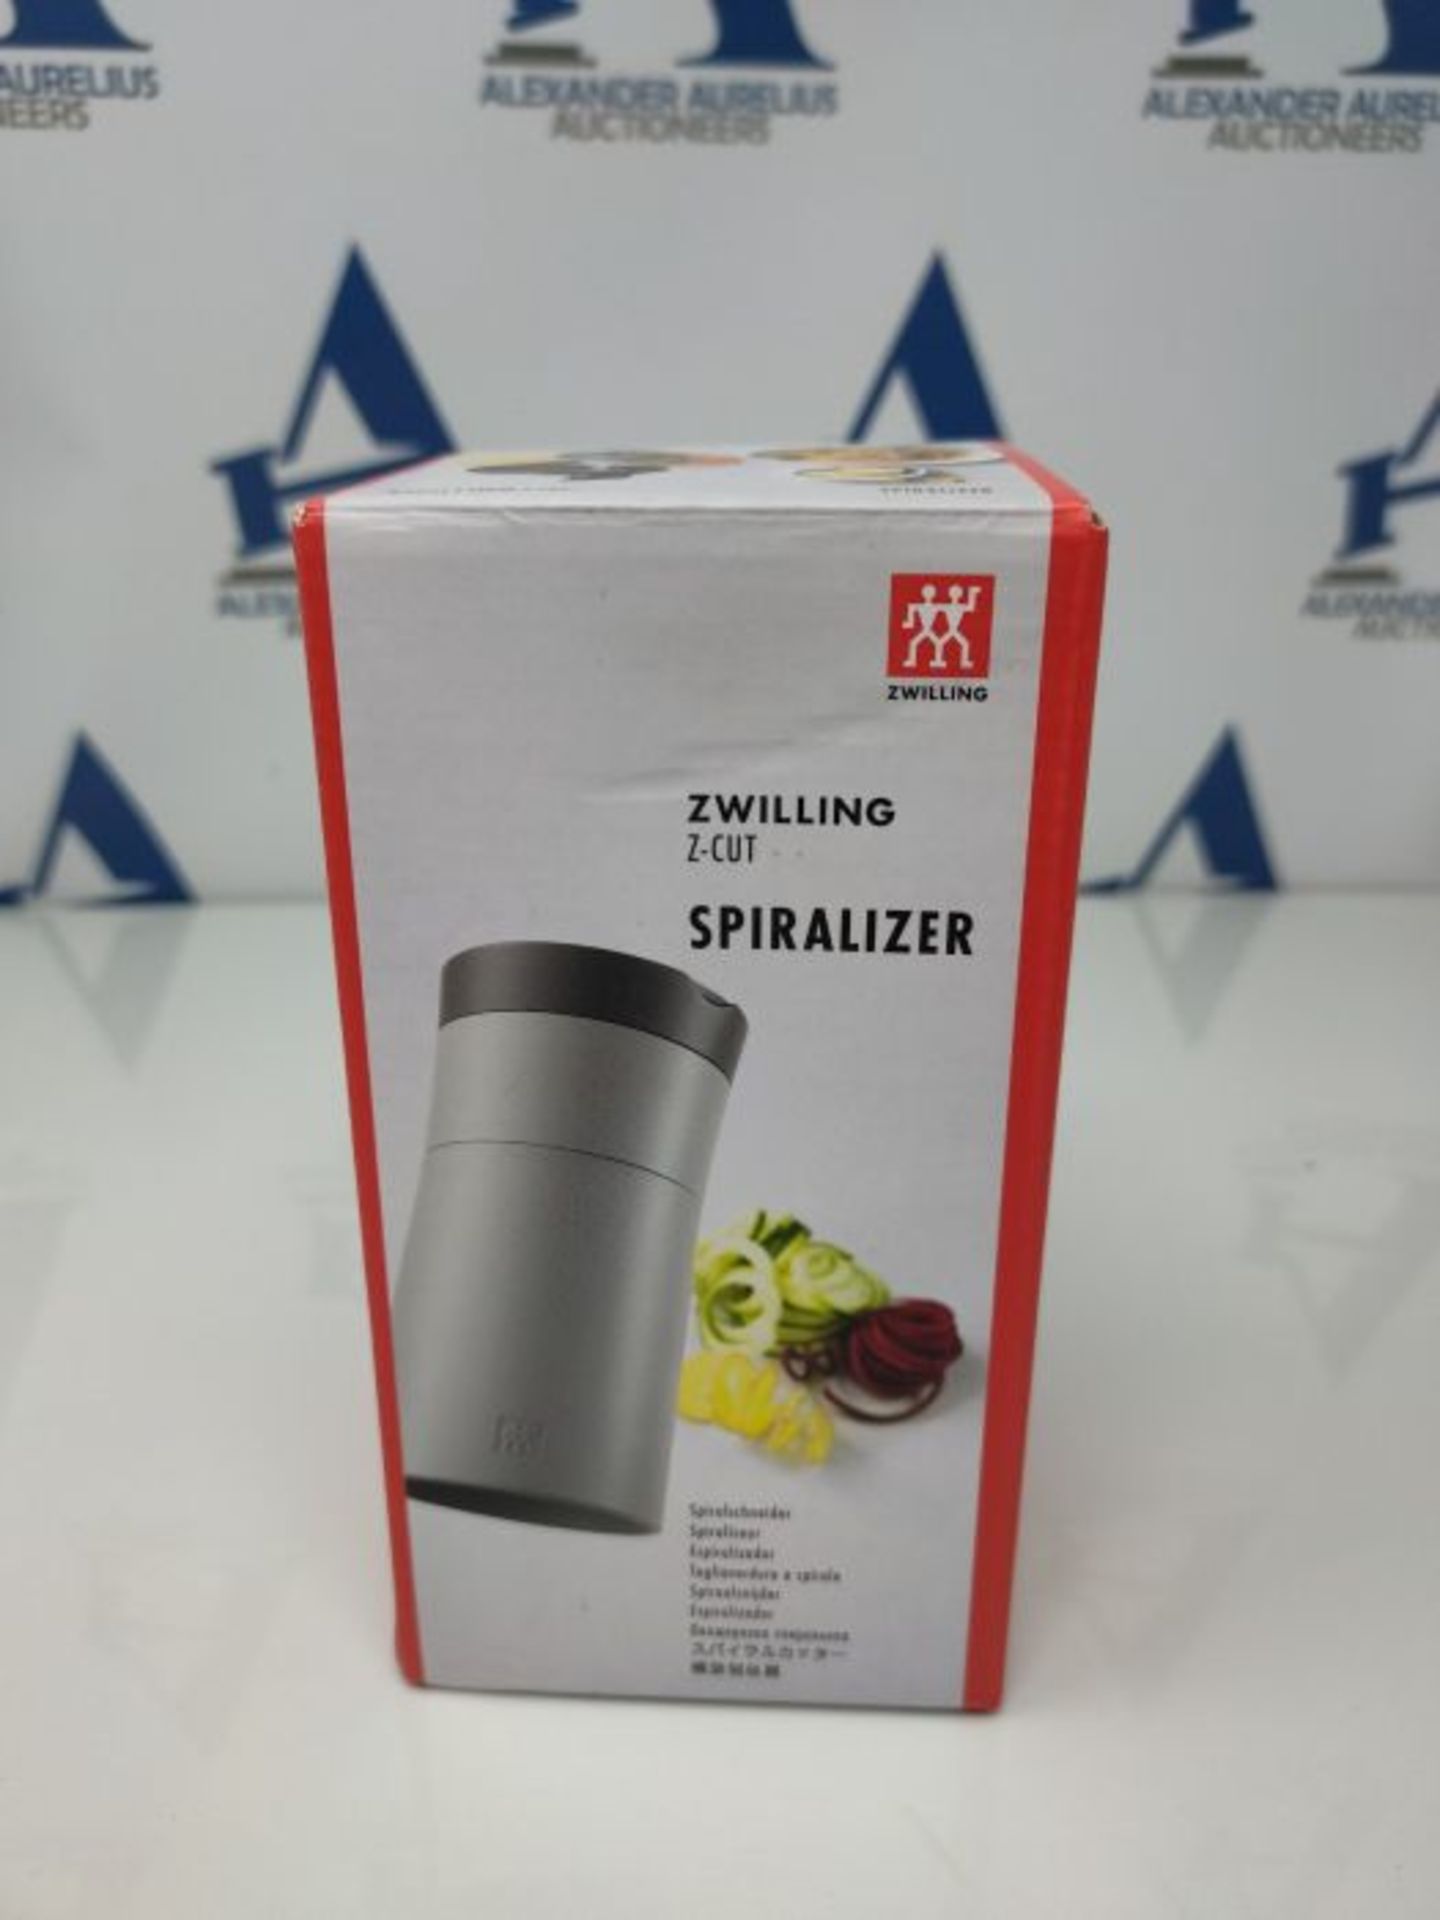 ZWILLING Z-Cut Stainless Steel Spiral Cutter, Multifunctional, Plastic Housing, Grey - Image 2 of 3